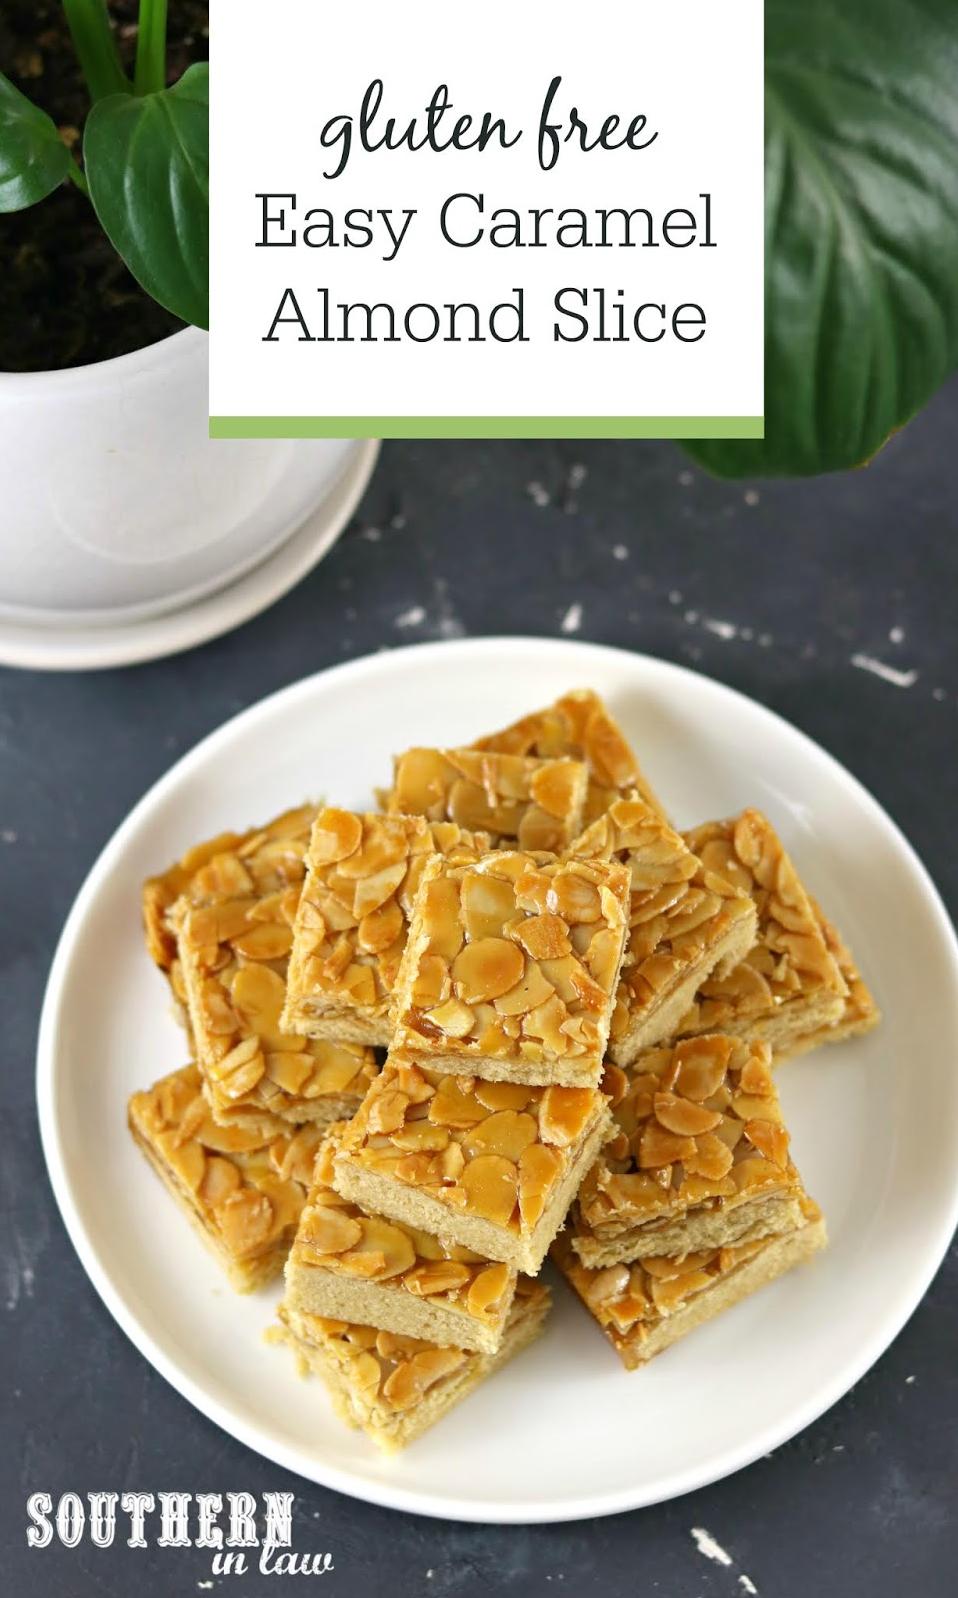  Nothing bland about this gluten-free dessert: it's packed with delicious almond and honey flavors.